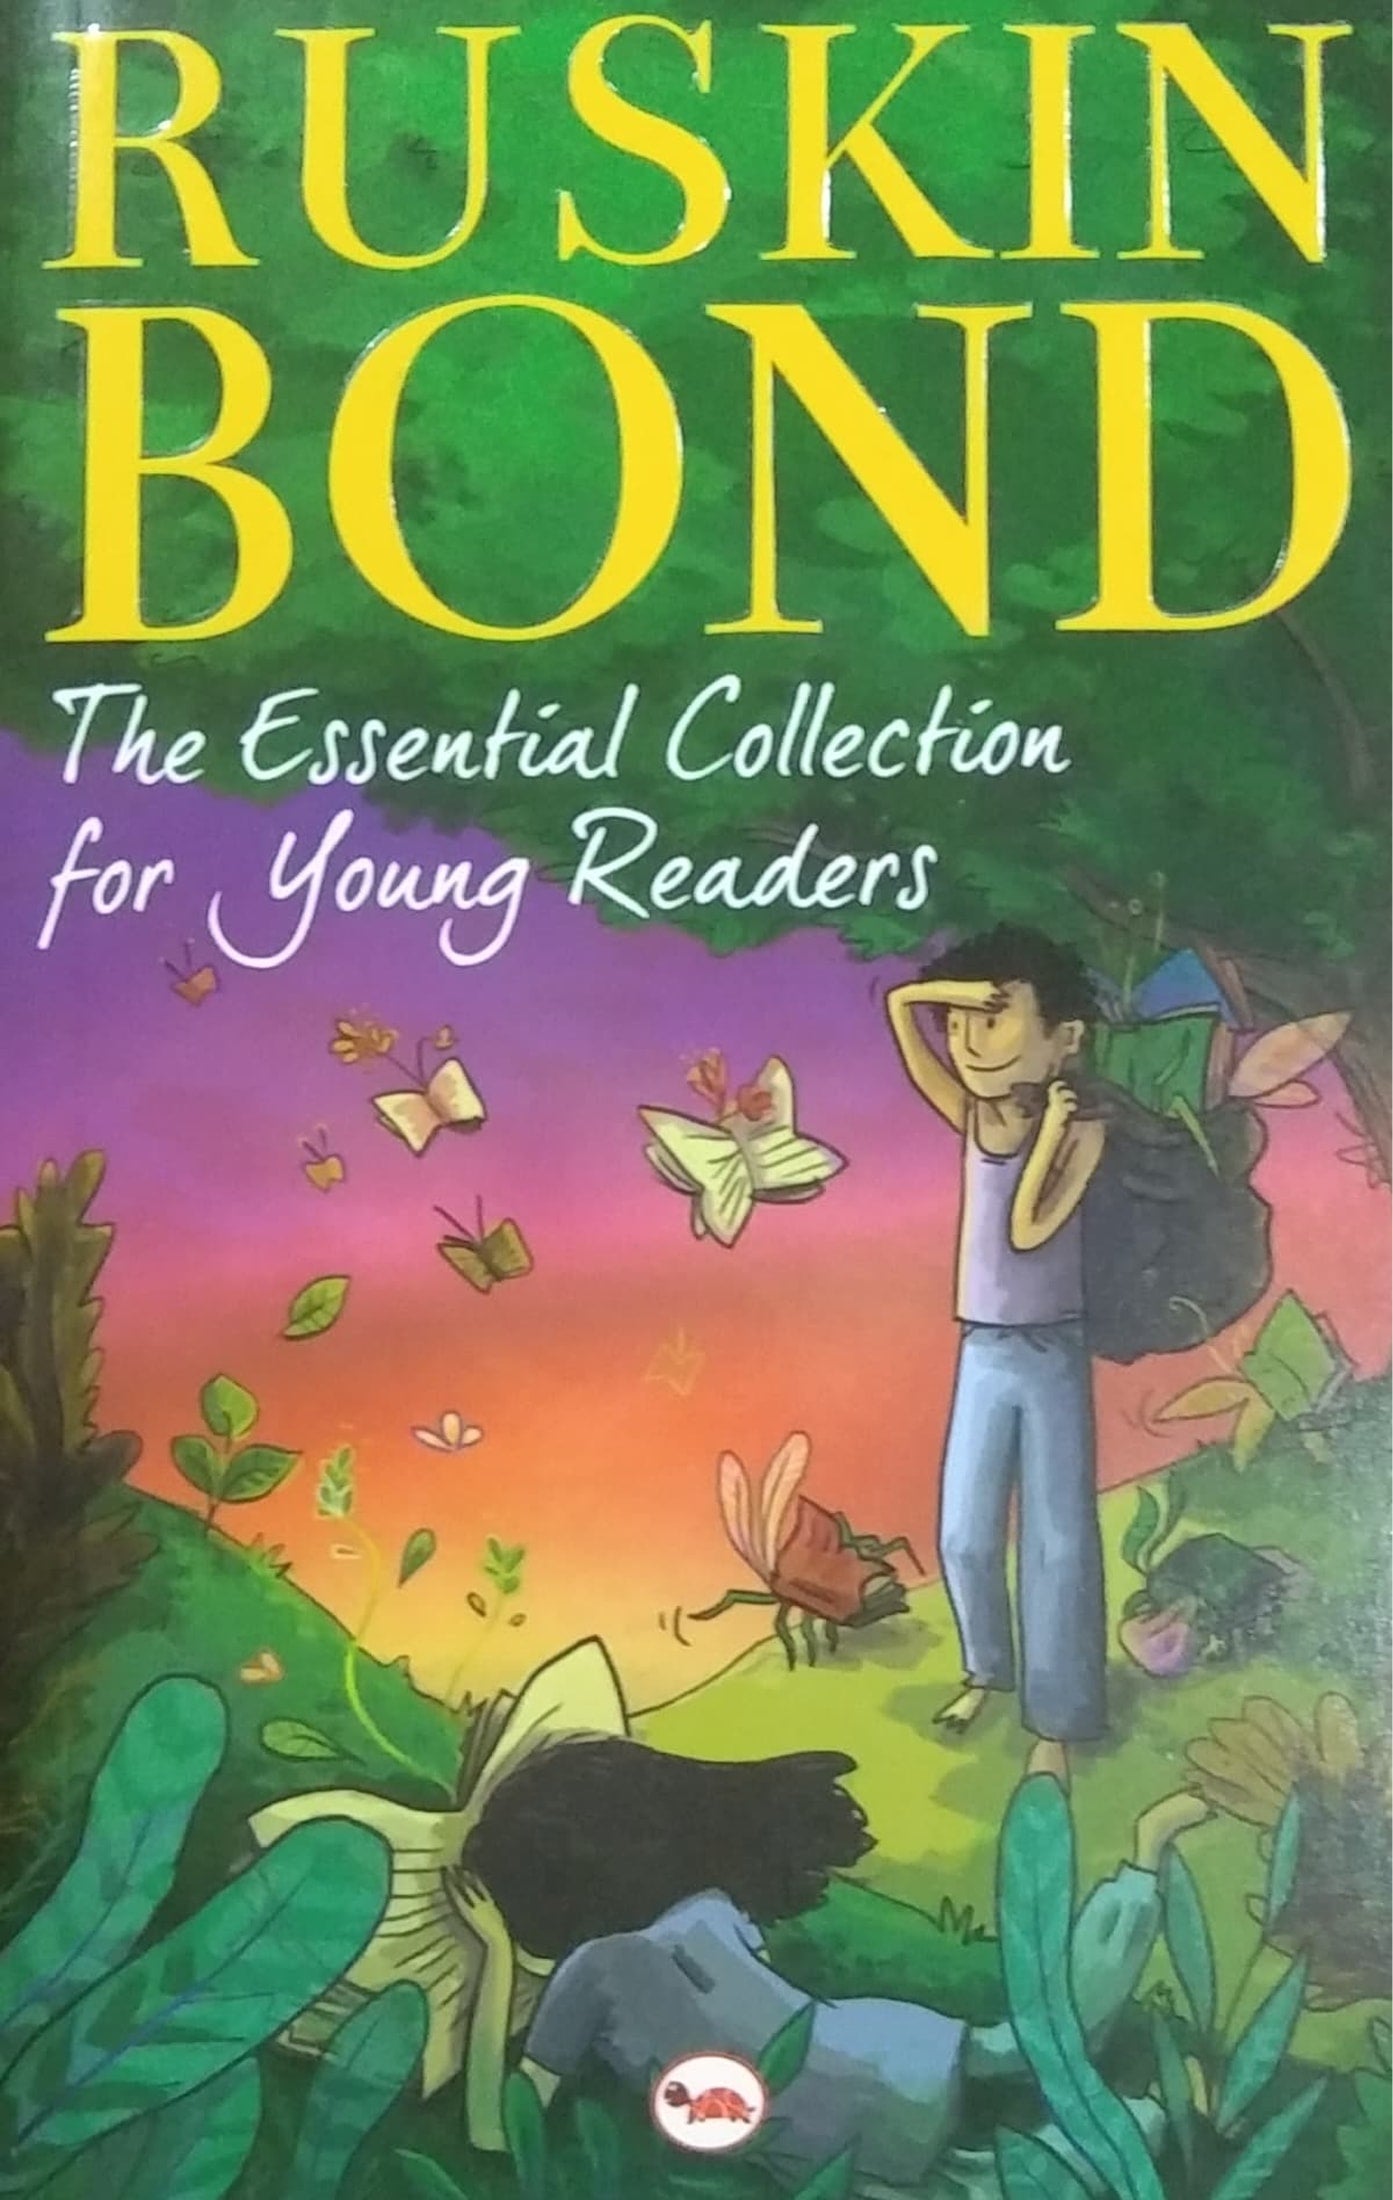 The Essential Collection for young Readers